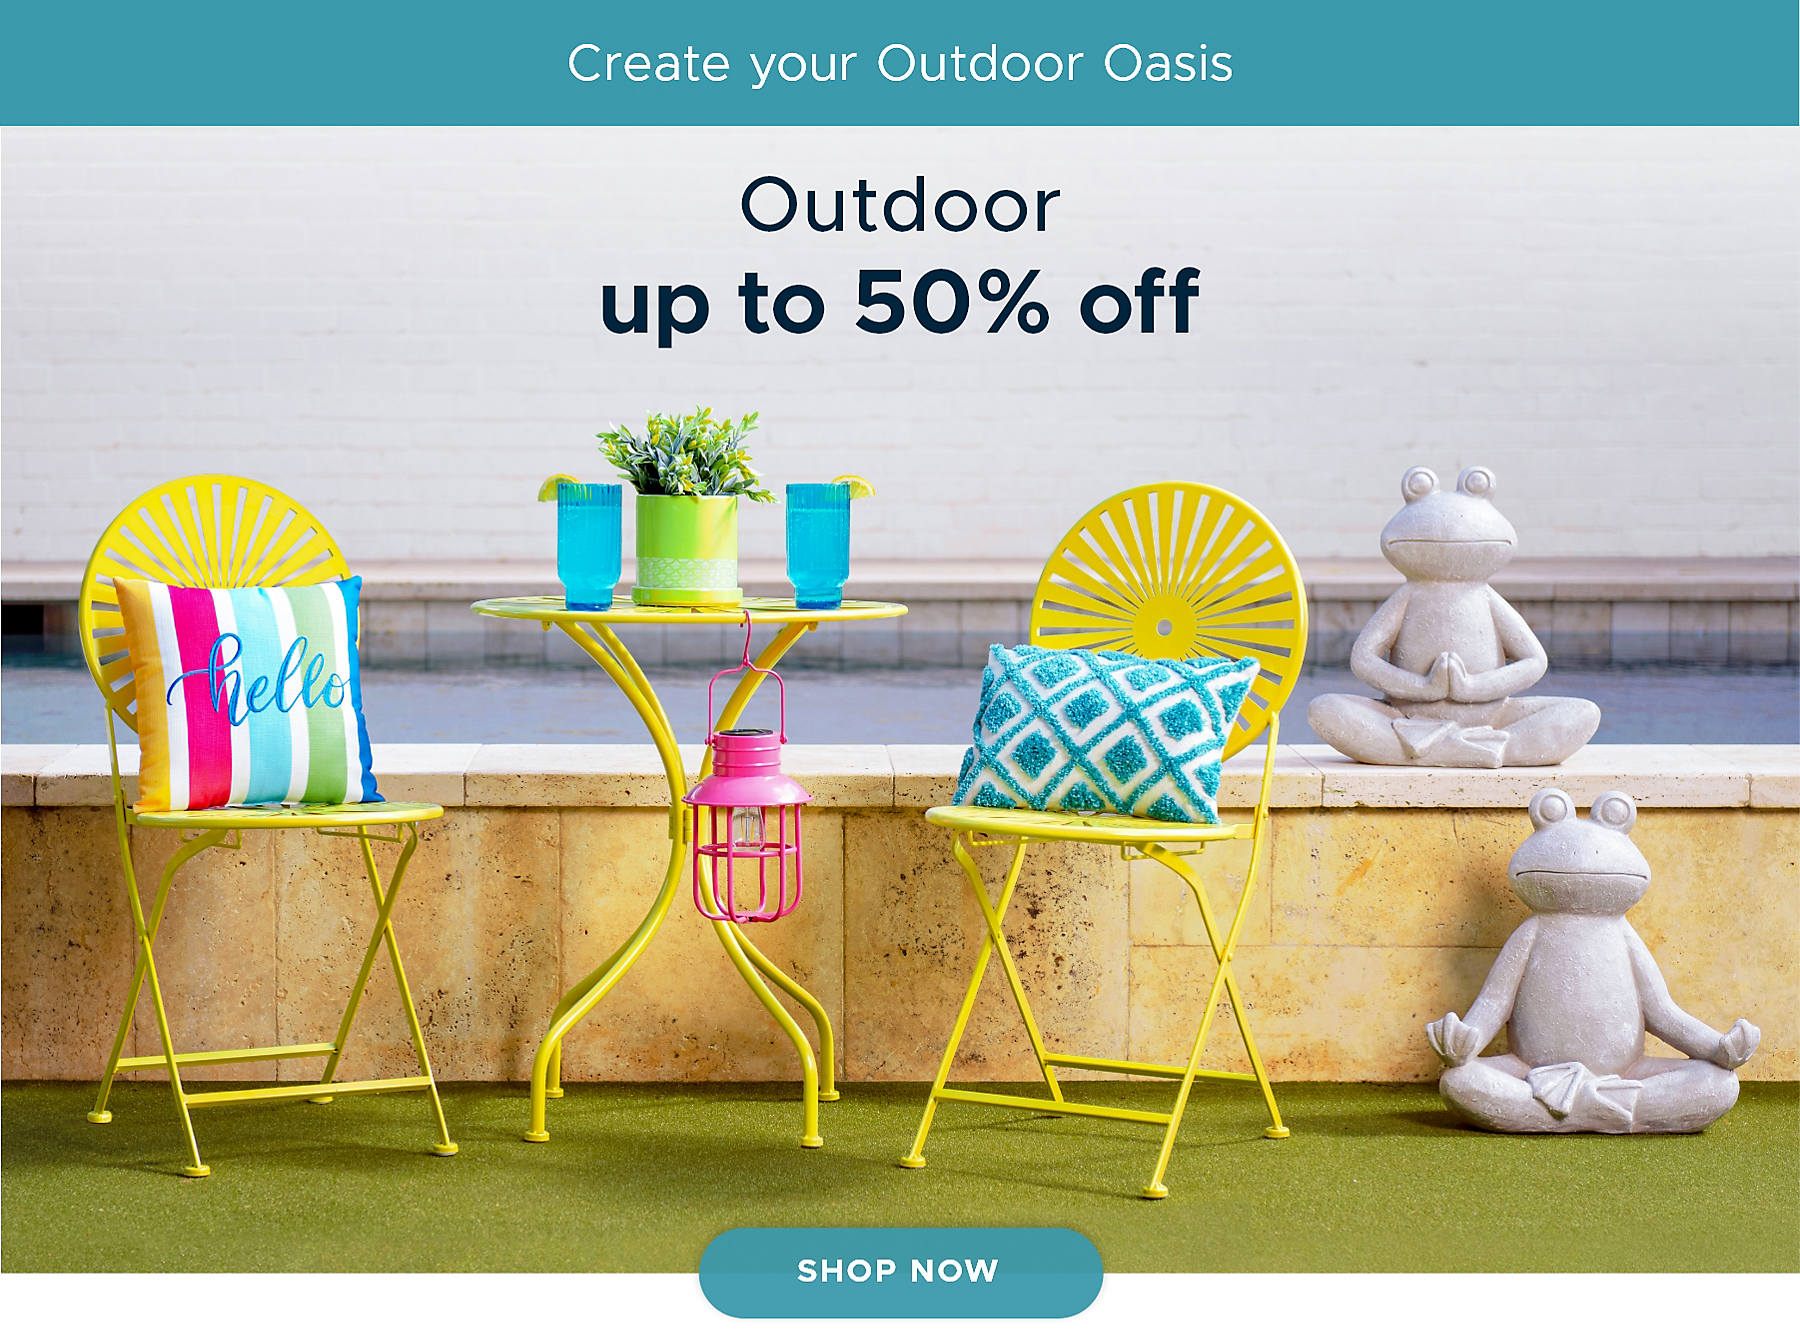 Create your Outdoor Oasis Outdoor up to 50% off shop now